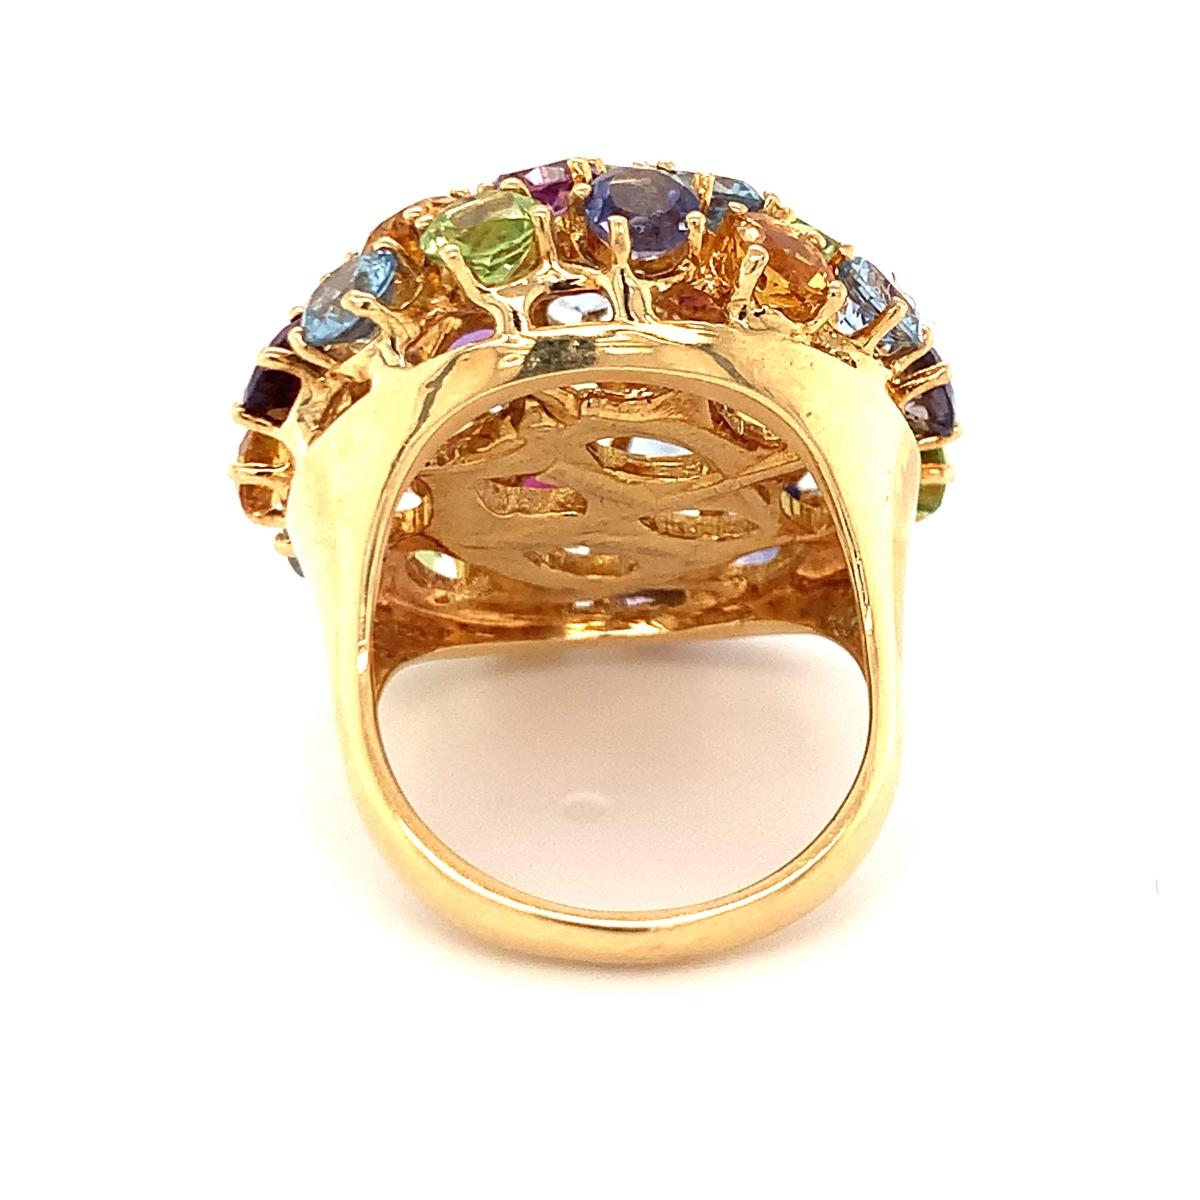 Multi-Gem Bombe Ring in 18K Yellow Gold, circa 1960s For Sale 2